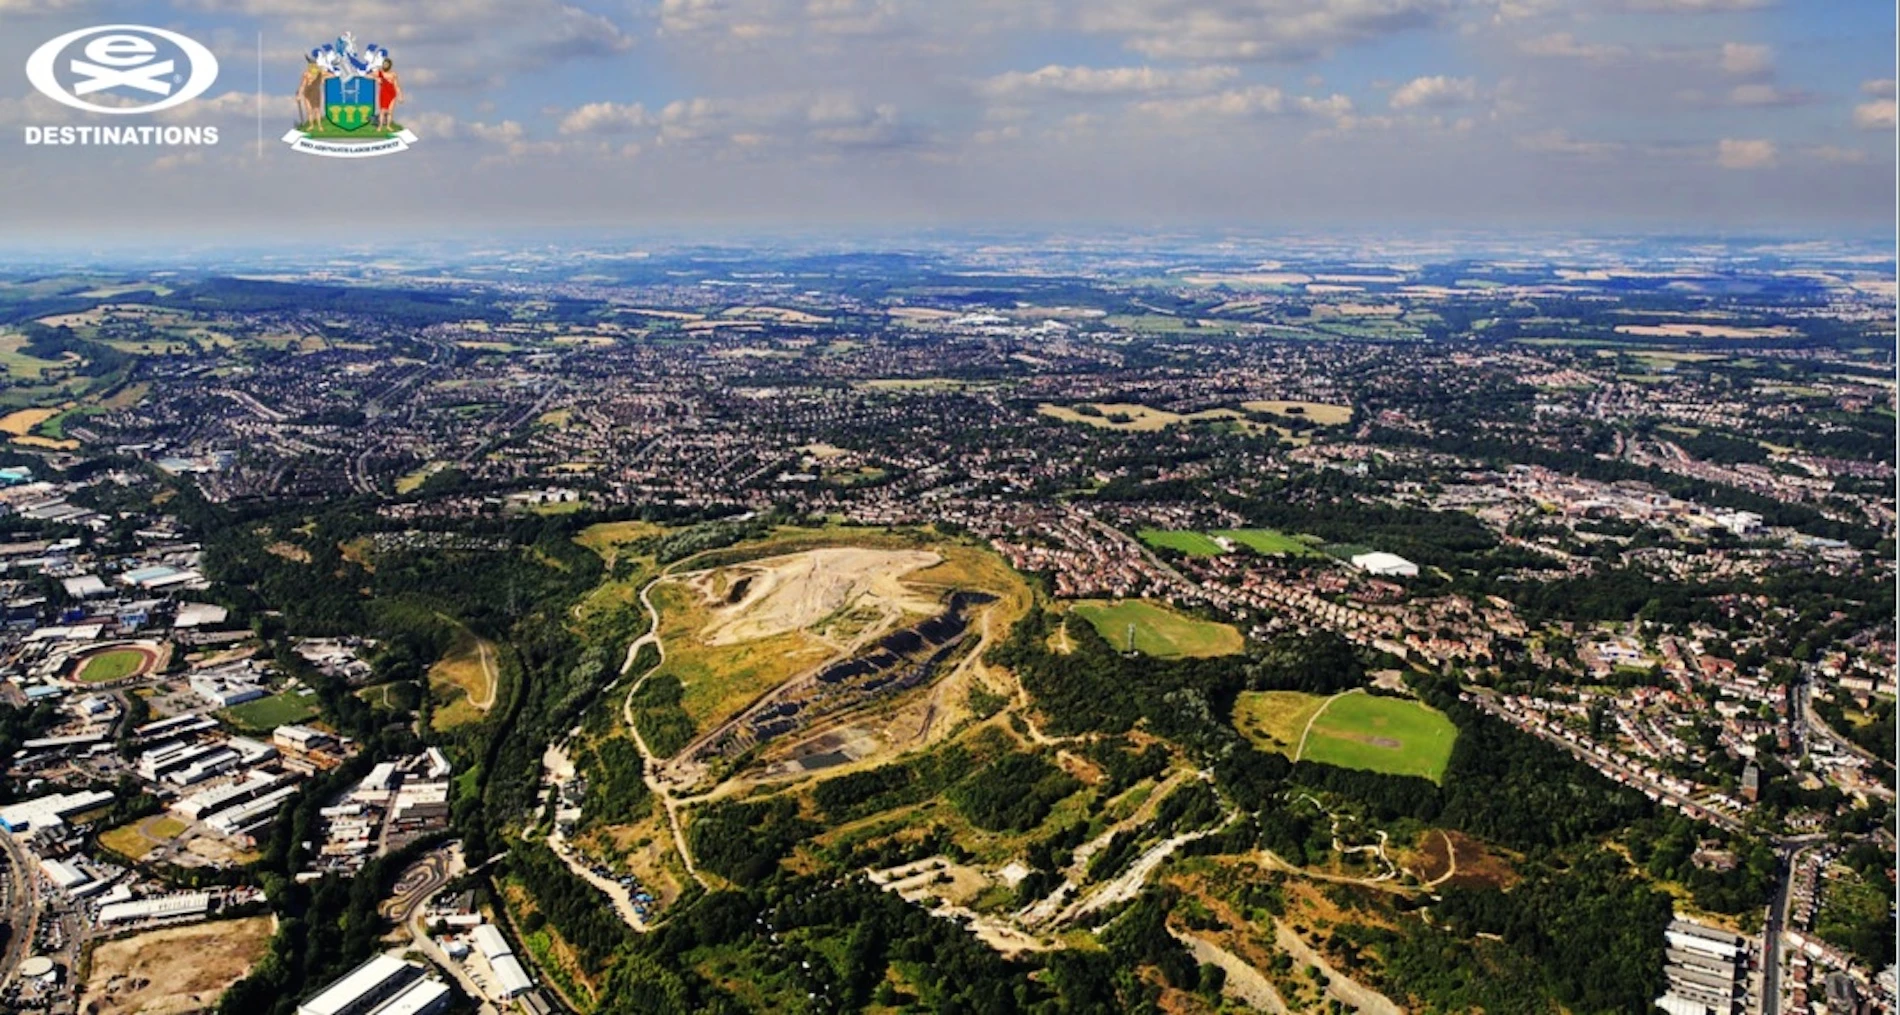 The Sheffield ski village and the surrounding area.